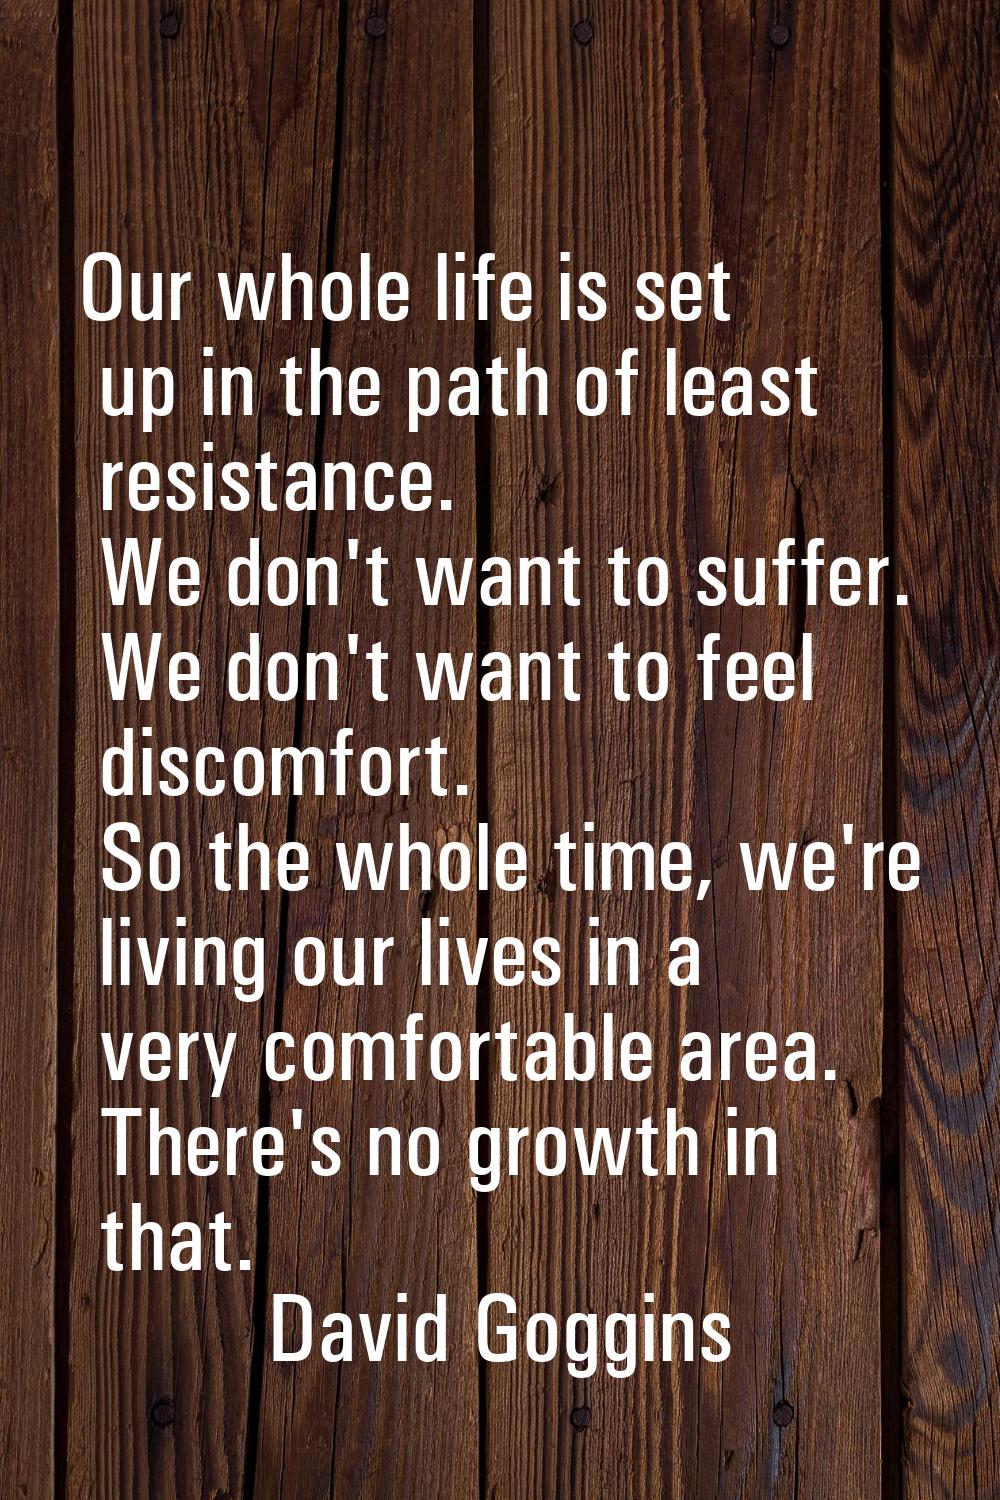 Our whole life is set up in the path of least resistance. We don't want to suffer. We don't want to